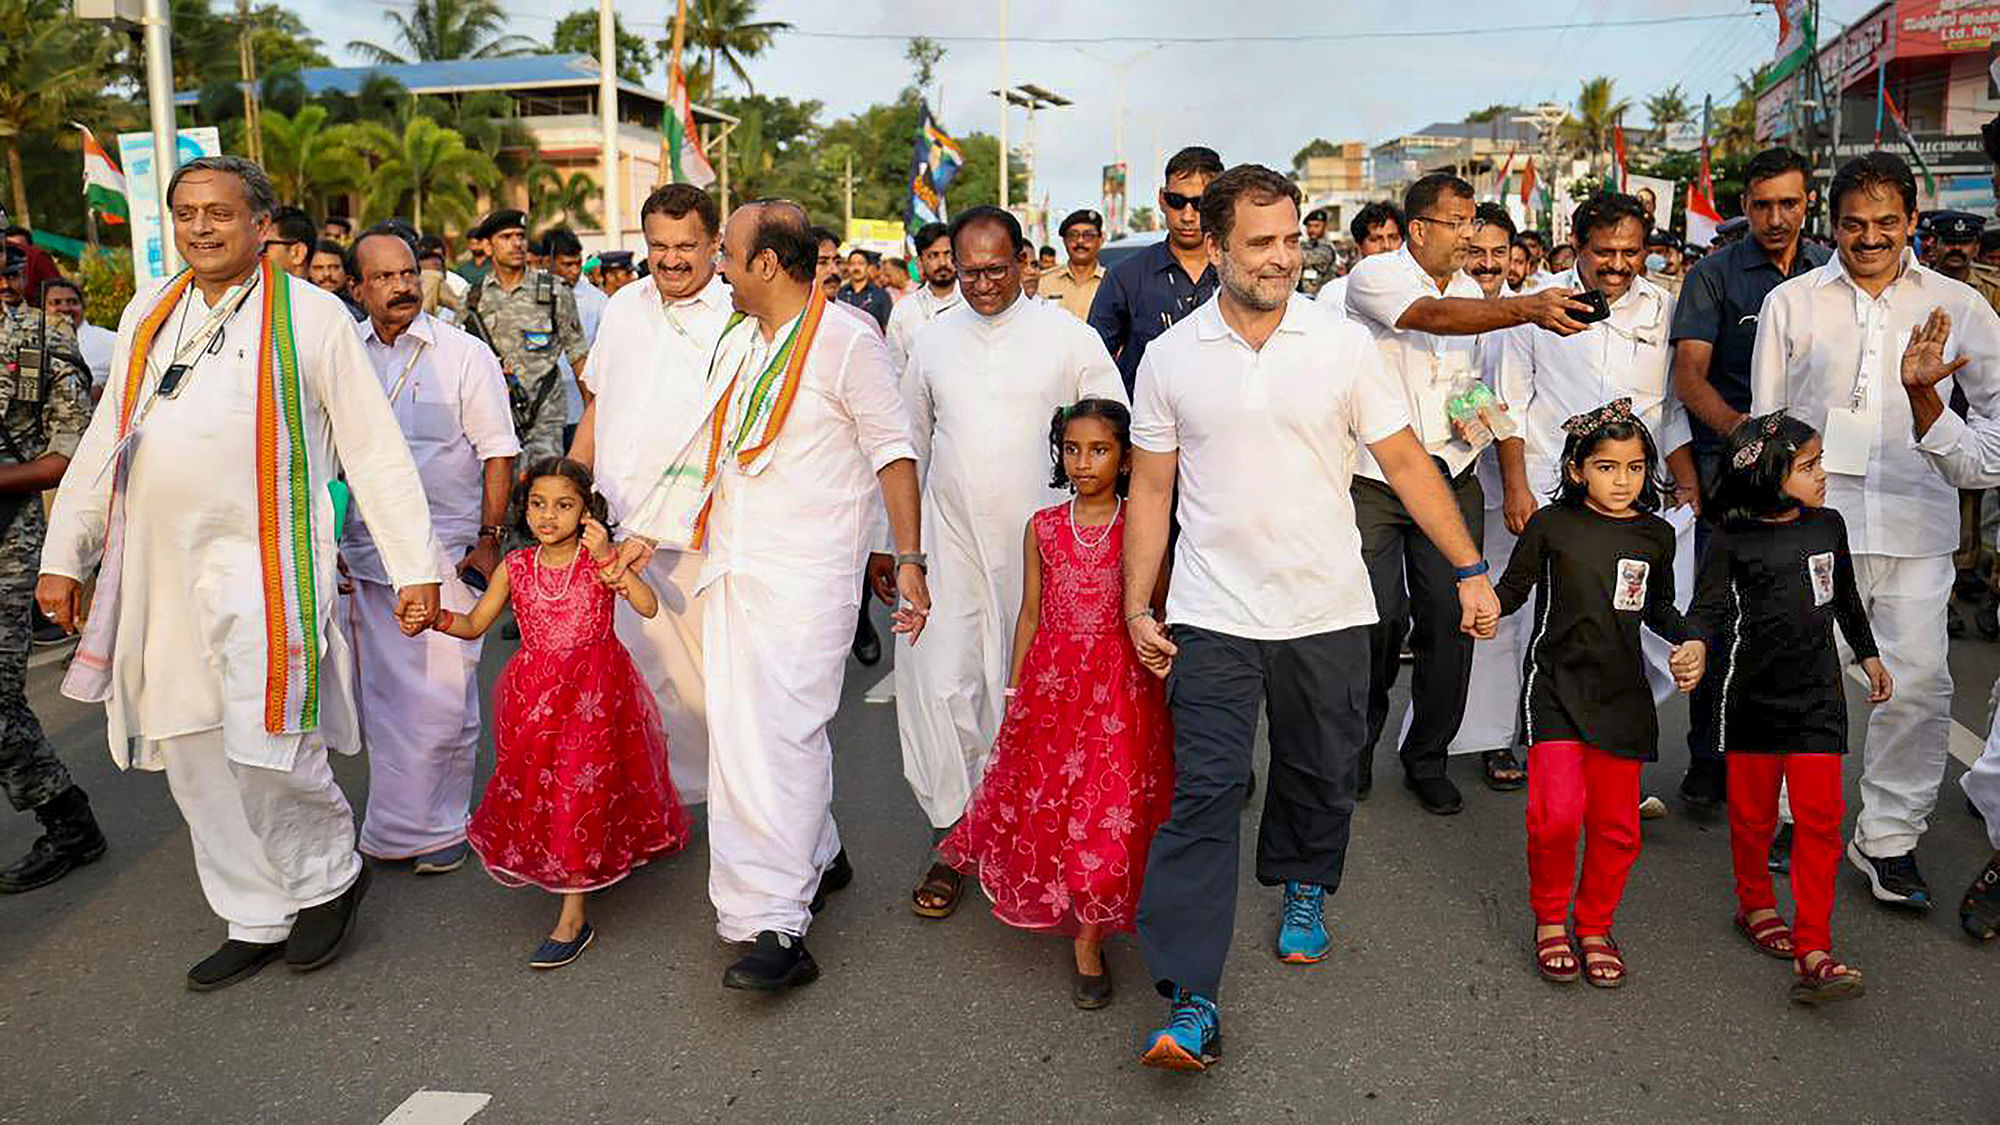 <div class="paragraphs"><p>Congress leaders Rahul Gandhi, Shashi Tharoor and others during the 'Bharat Jodo Yatra' in Kerala on 11 September.&nbsp;</p></div>